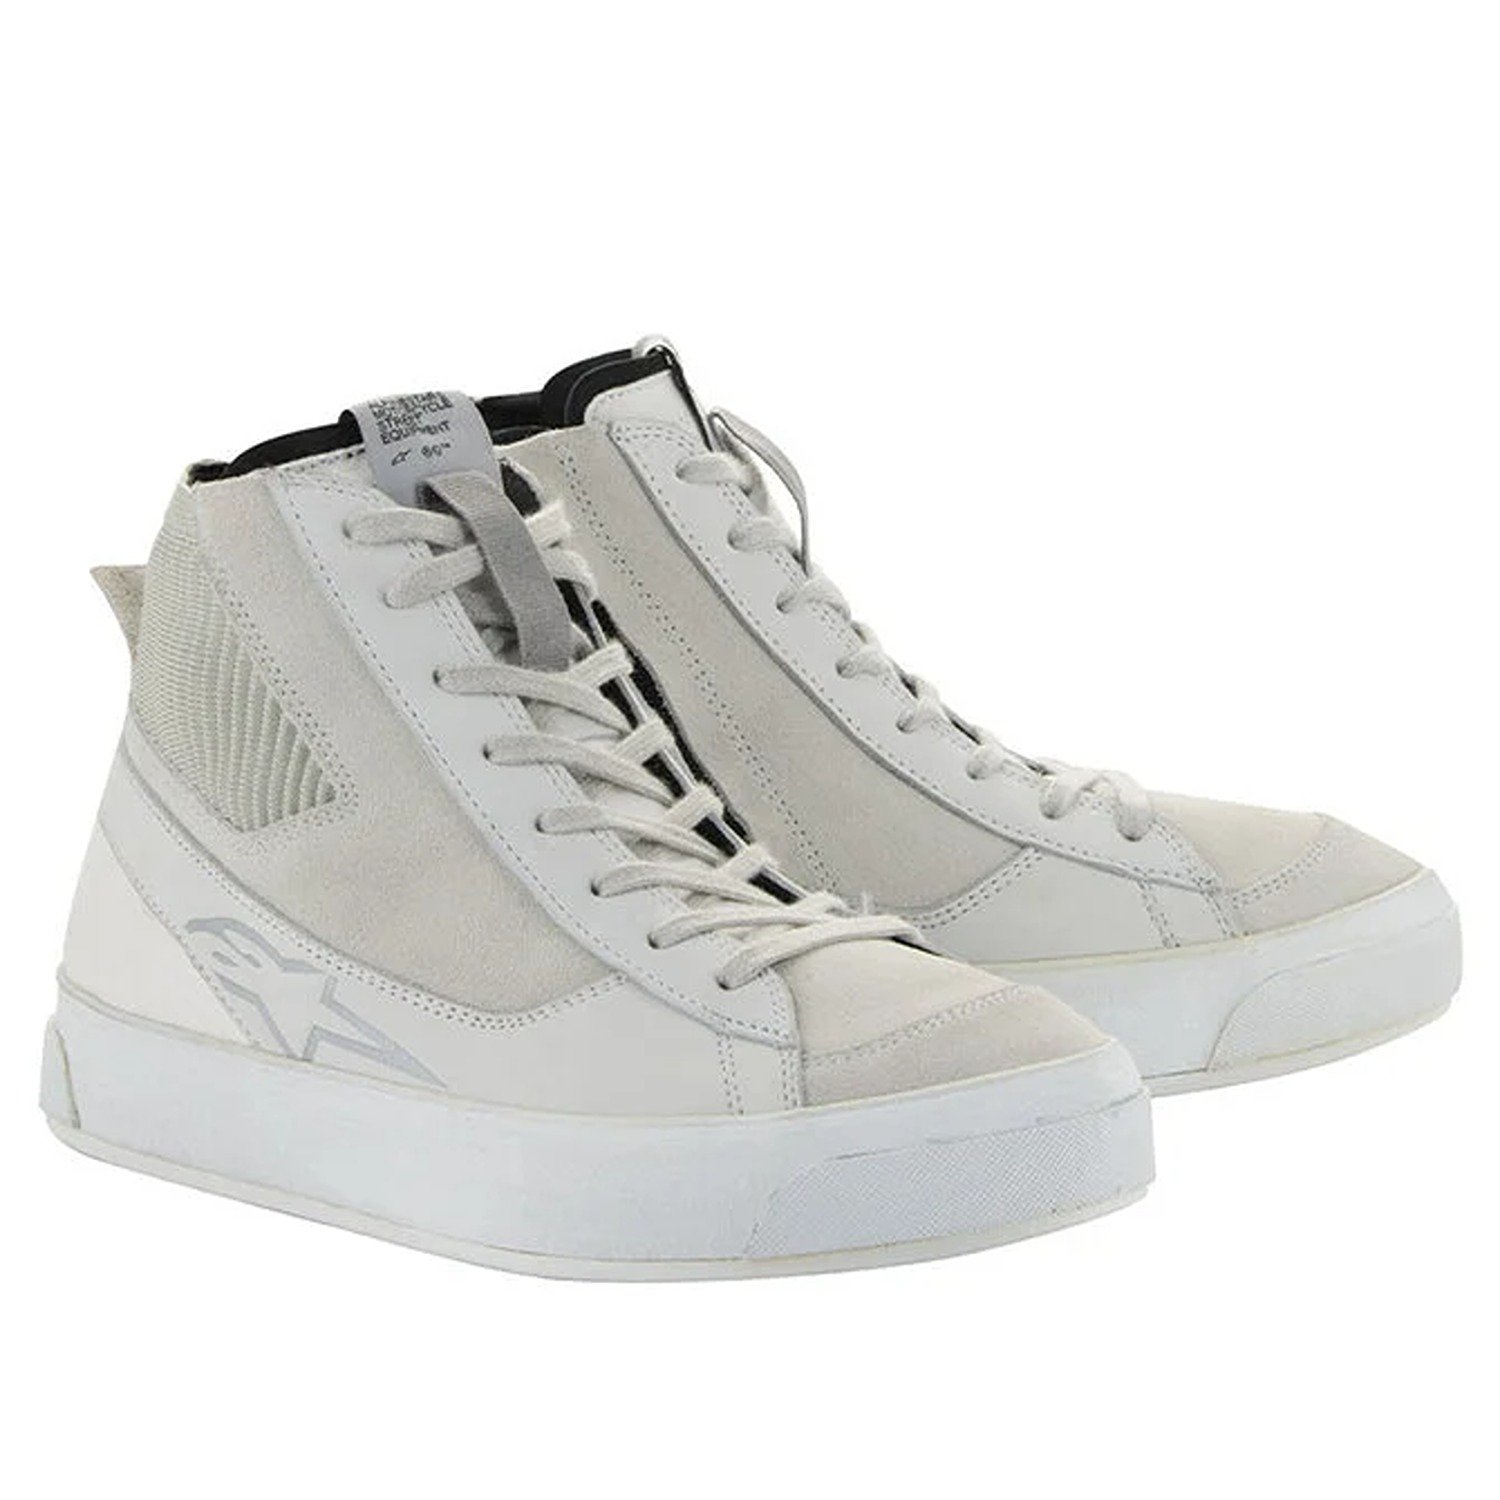 Image of Alpinestars Stated Shoes White Cool Gray Size US 95 ID 8059347349503